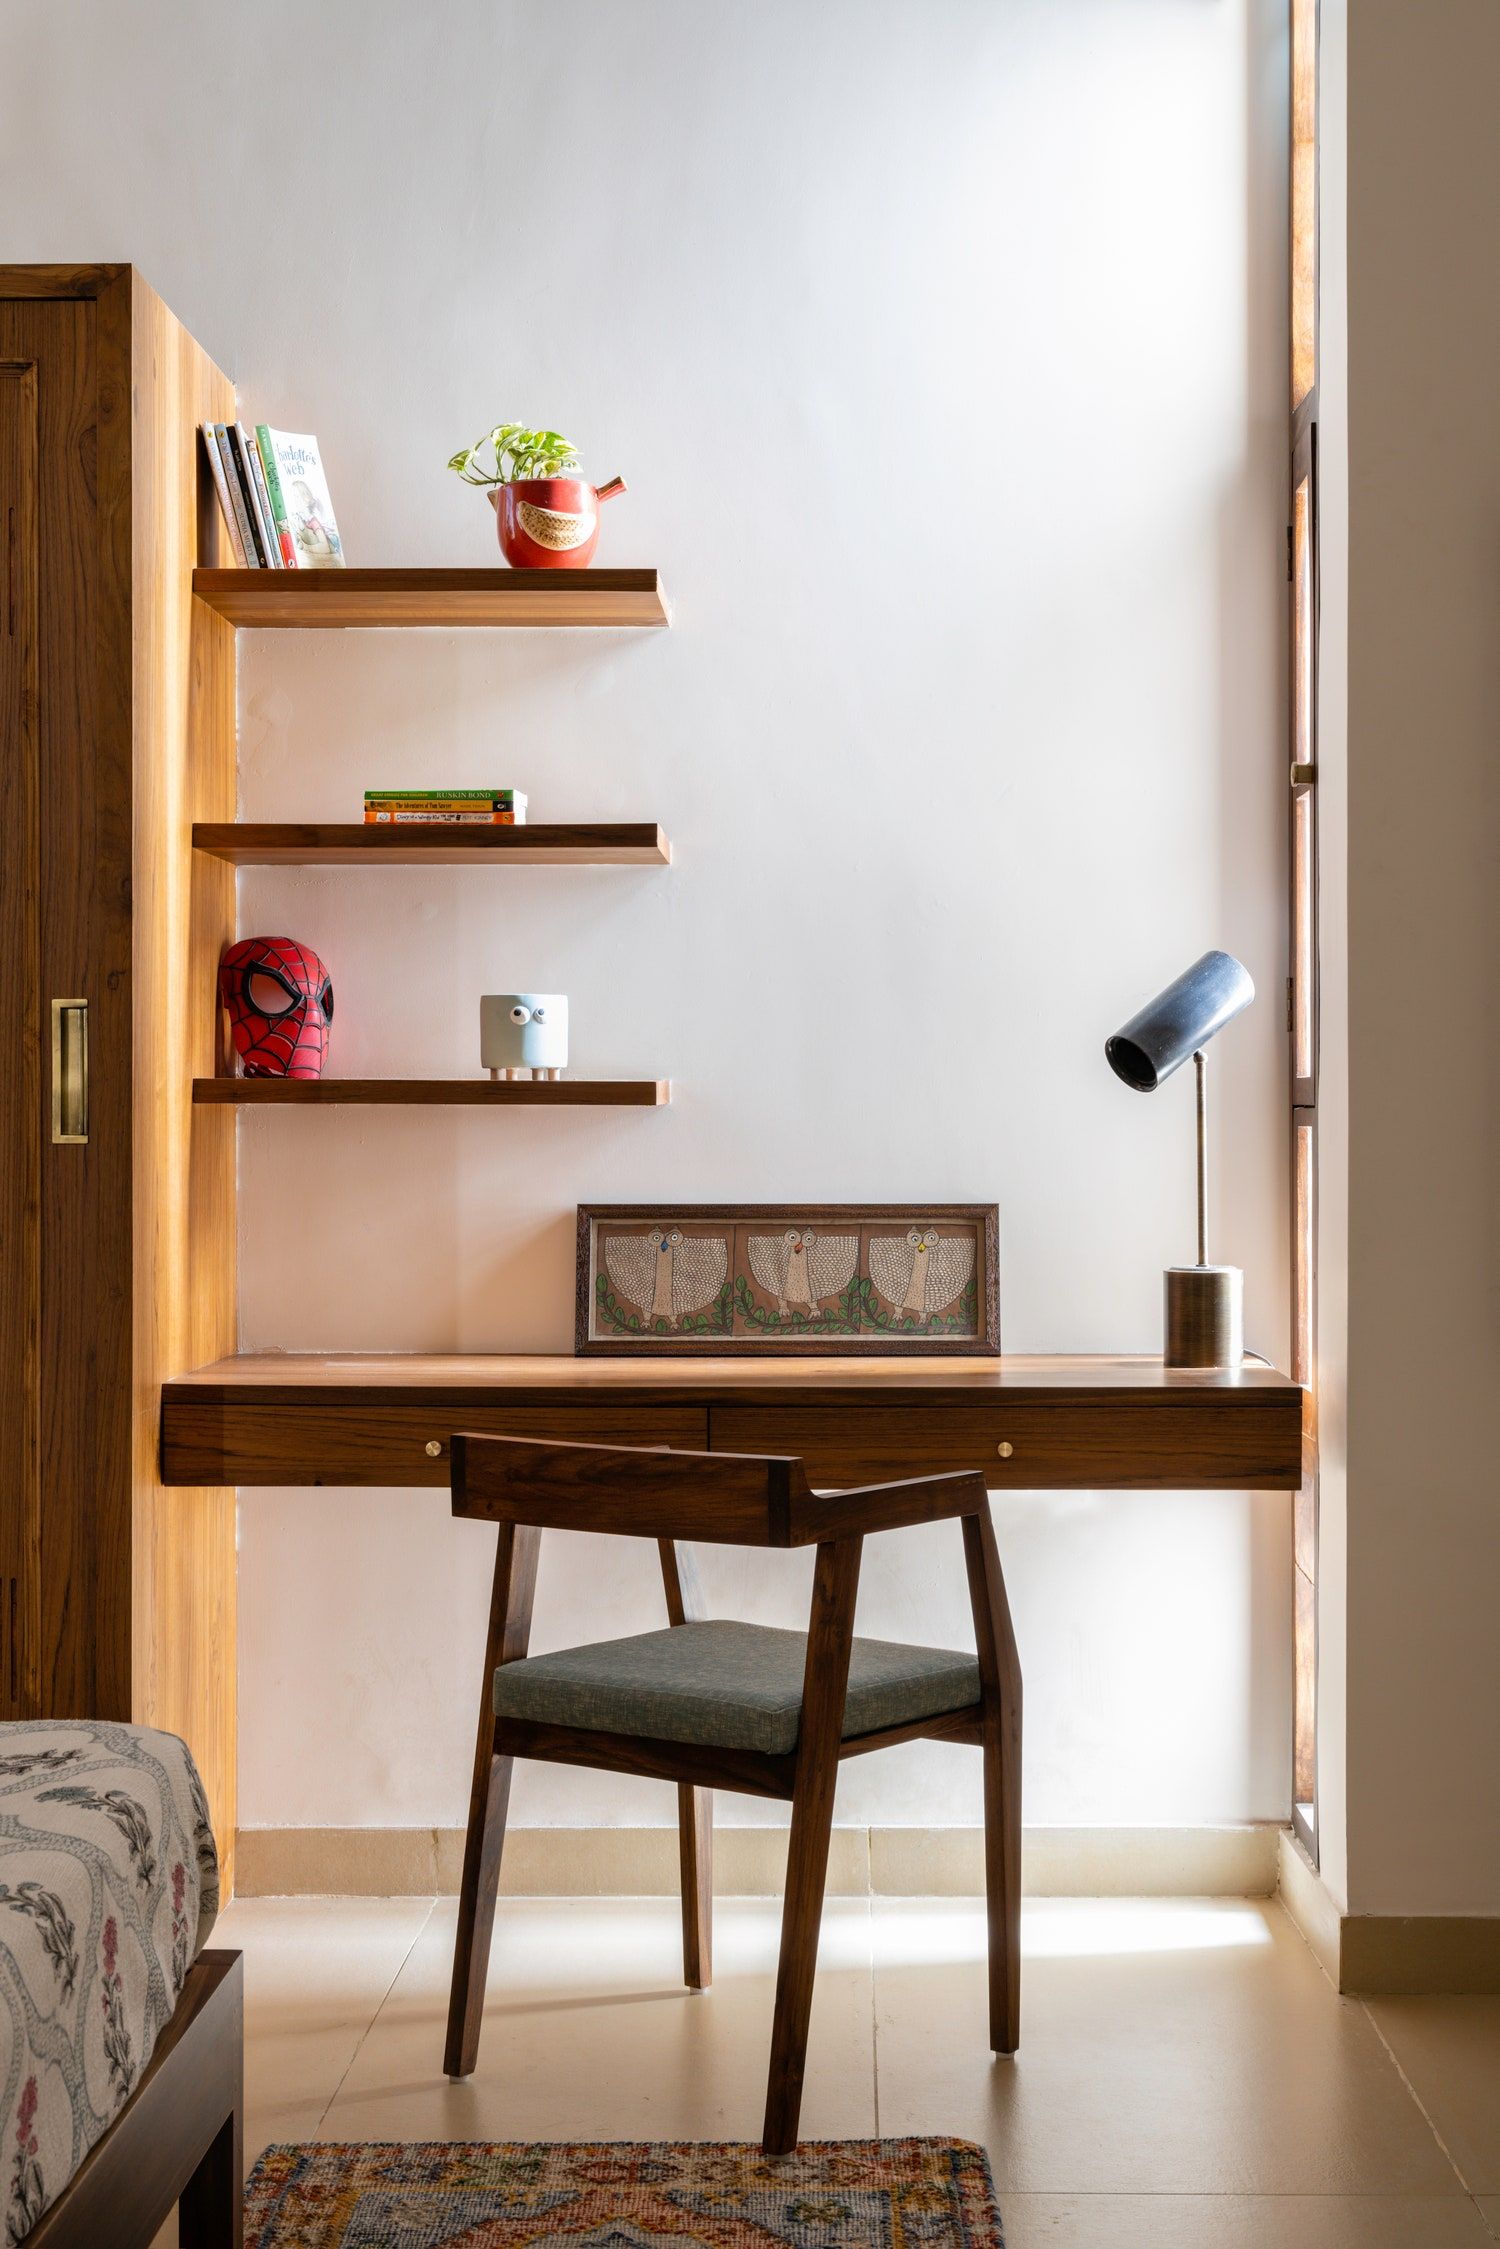 Small Wooden Table and Wall Shelves